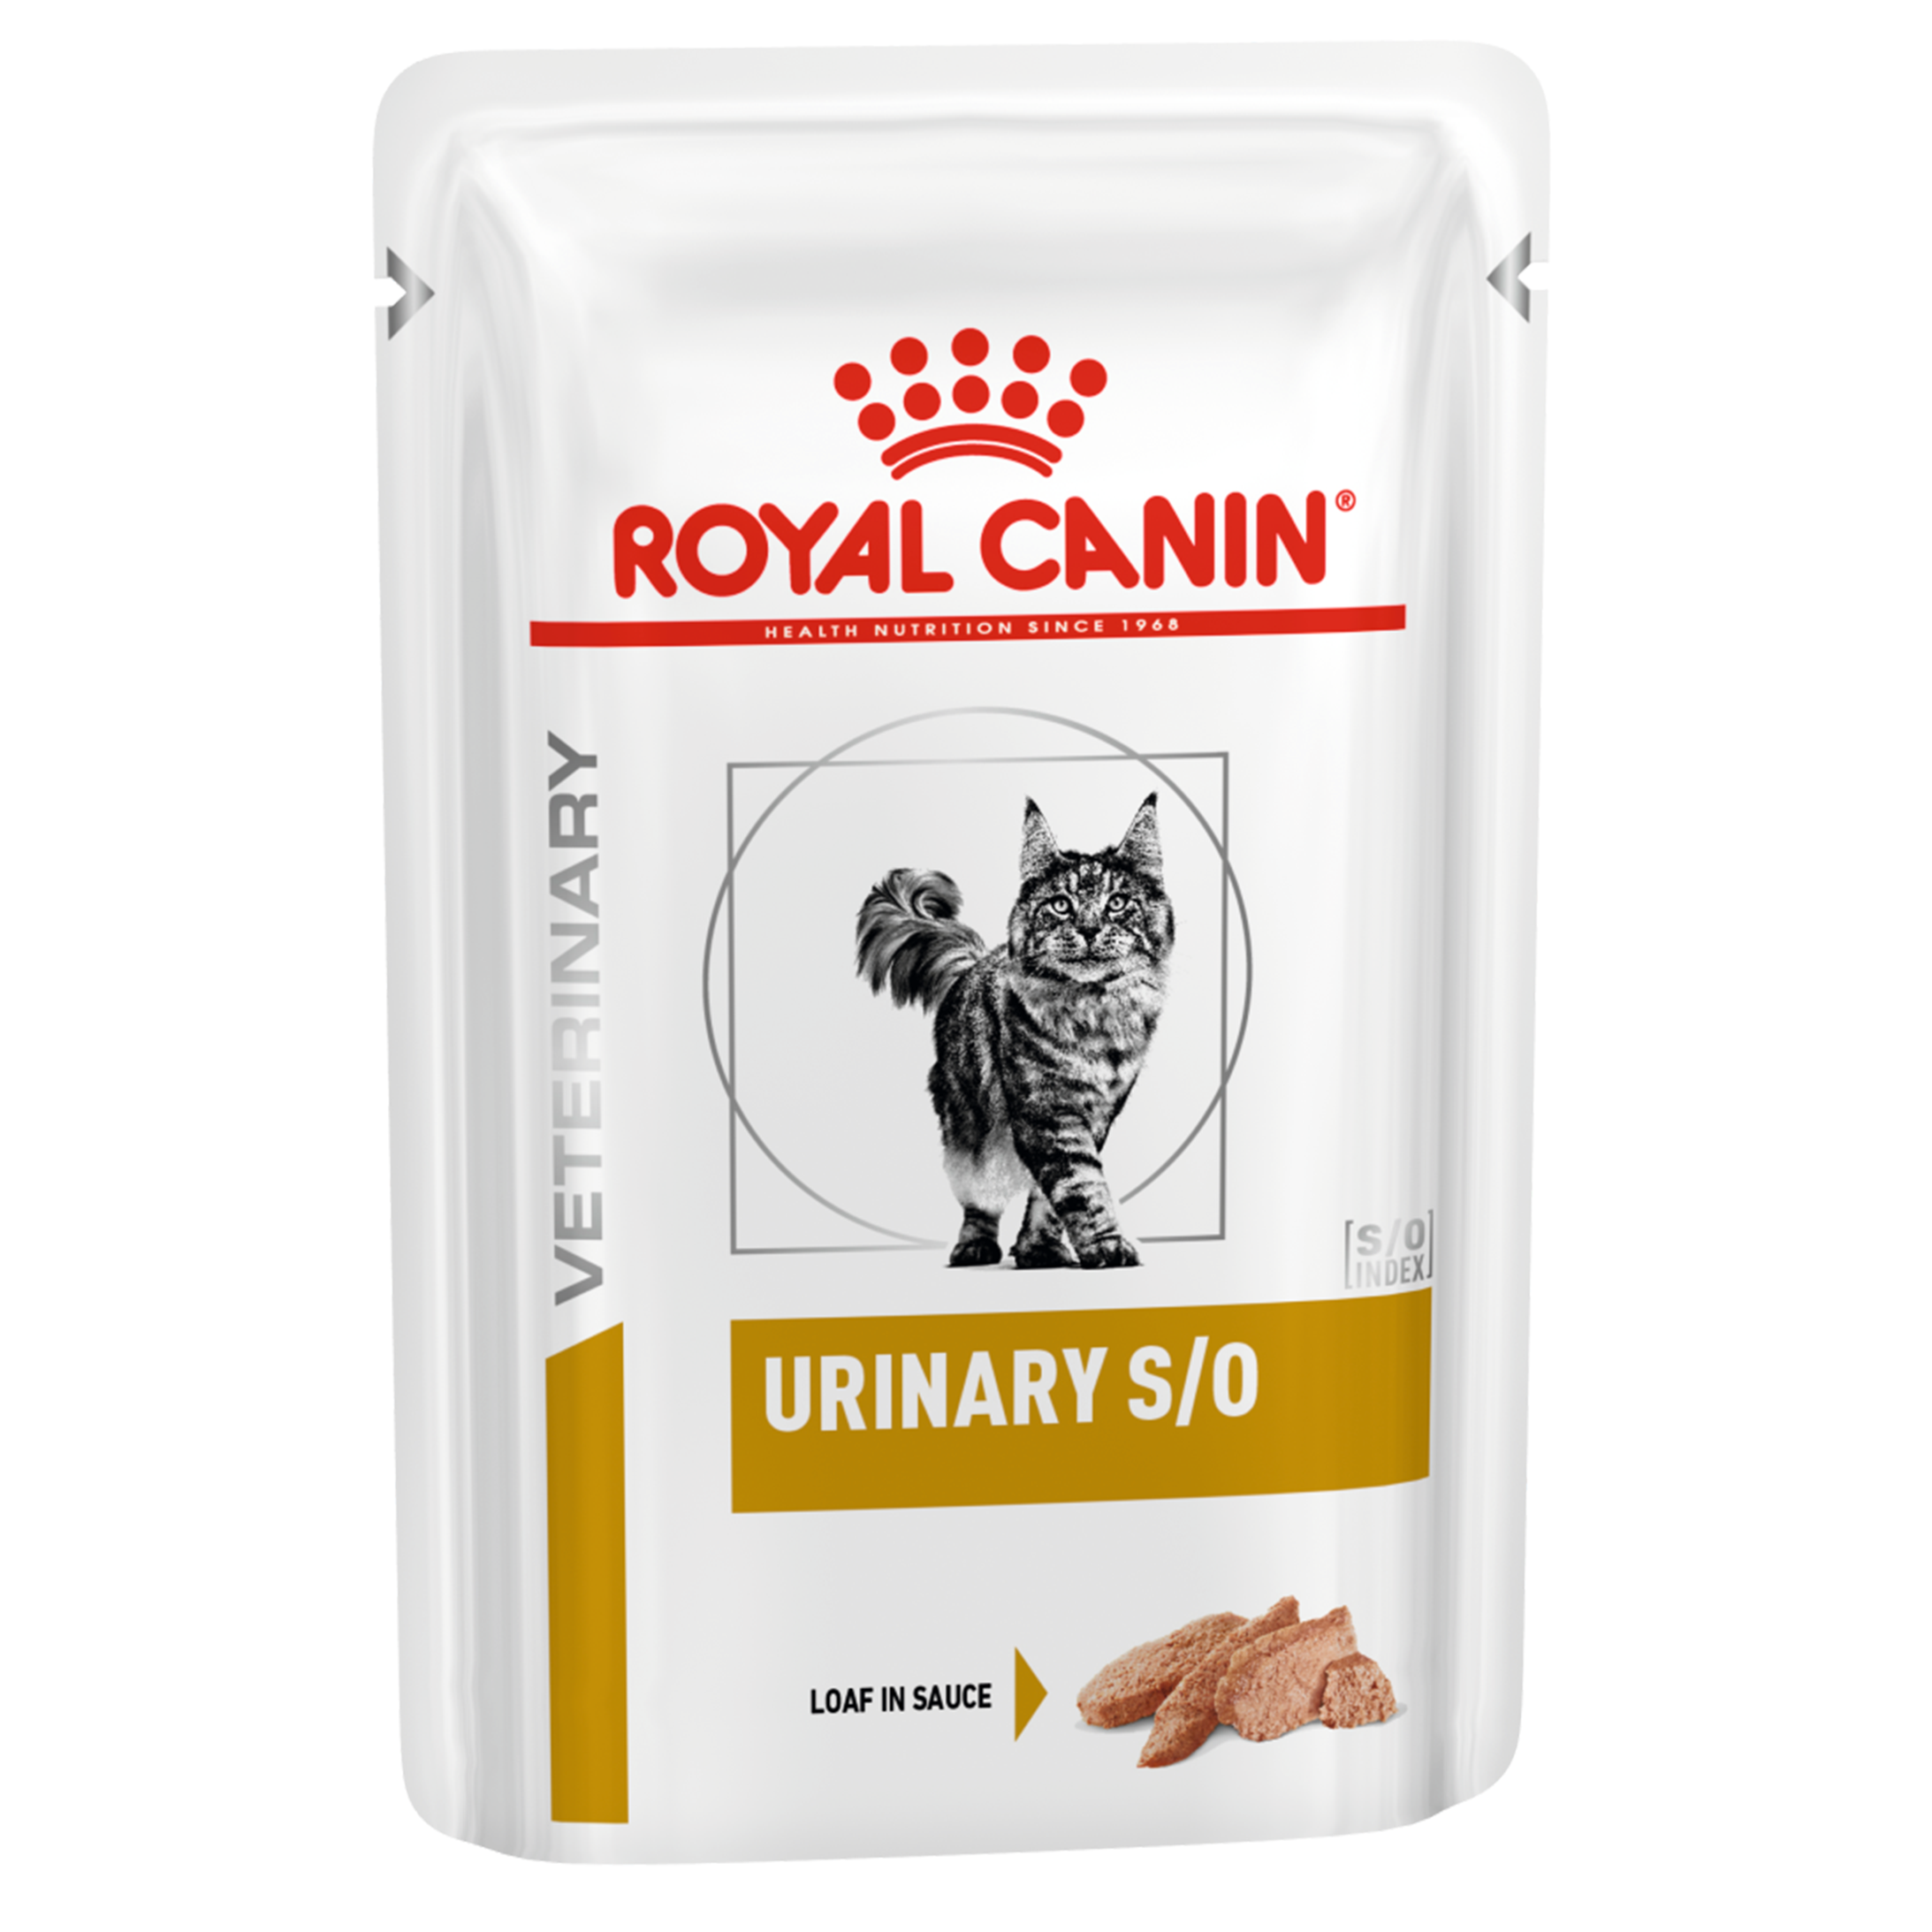 Royal Canin Feline Urinary S/O in Gravy (85 gm\Pouch) - Wet food for Lower Urinary tract disease – 12 pouches per box